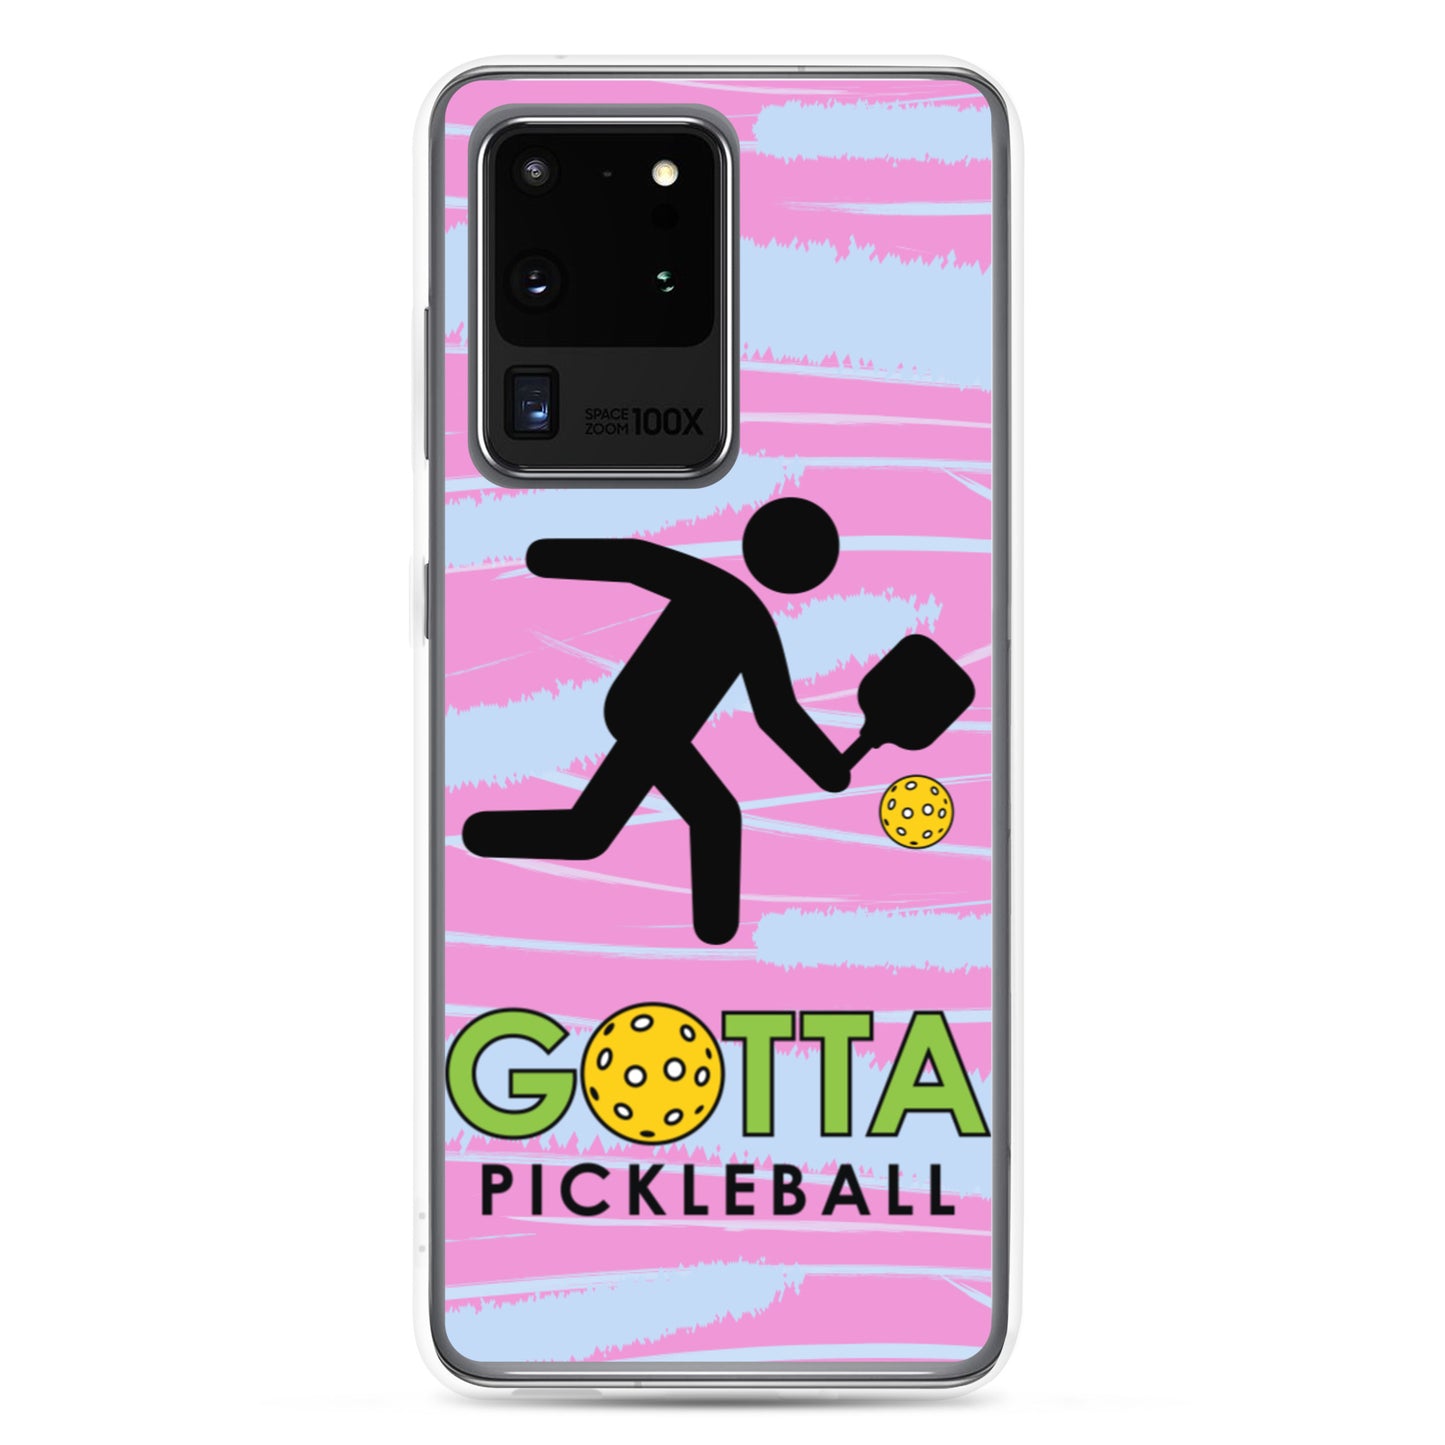 Samsung Case: GOTTA PICKLEBALL WITH OUR MASCOT OZZIE PINK & BLUE